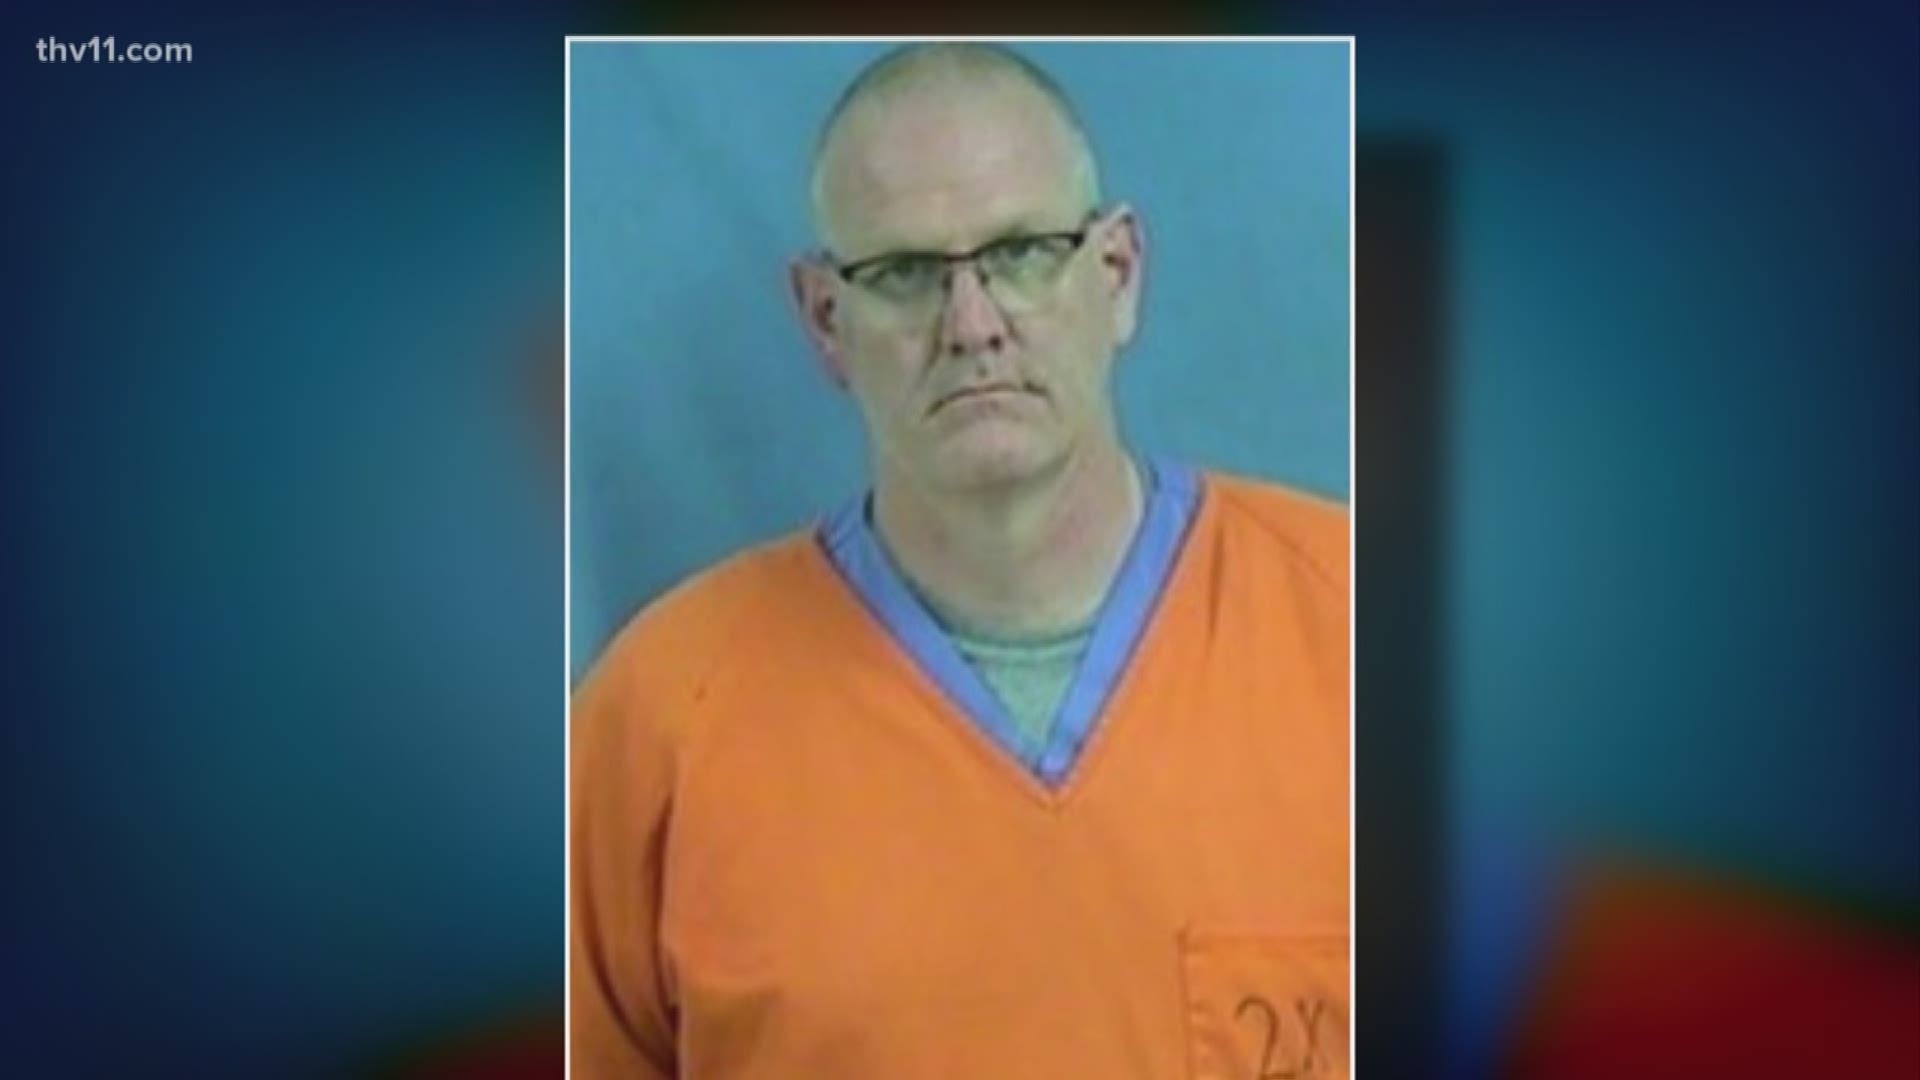 In Searcy, police have charged a man who is already in jail for rape with human trafficking.